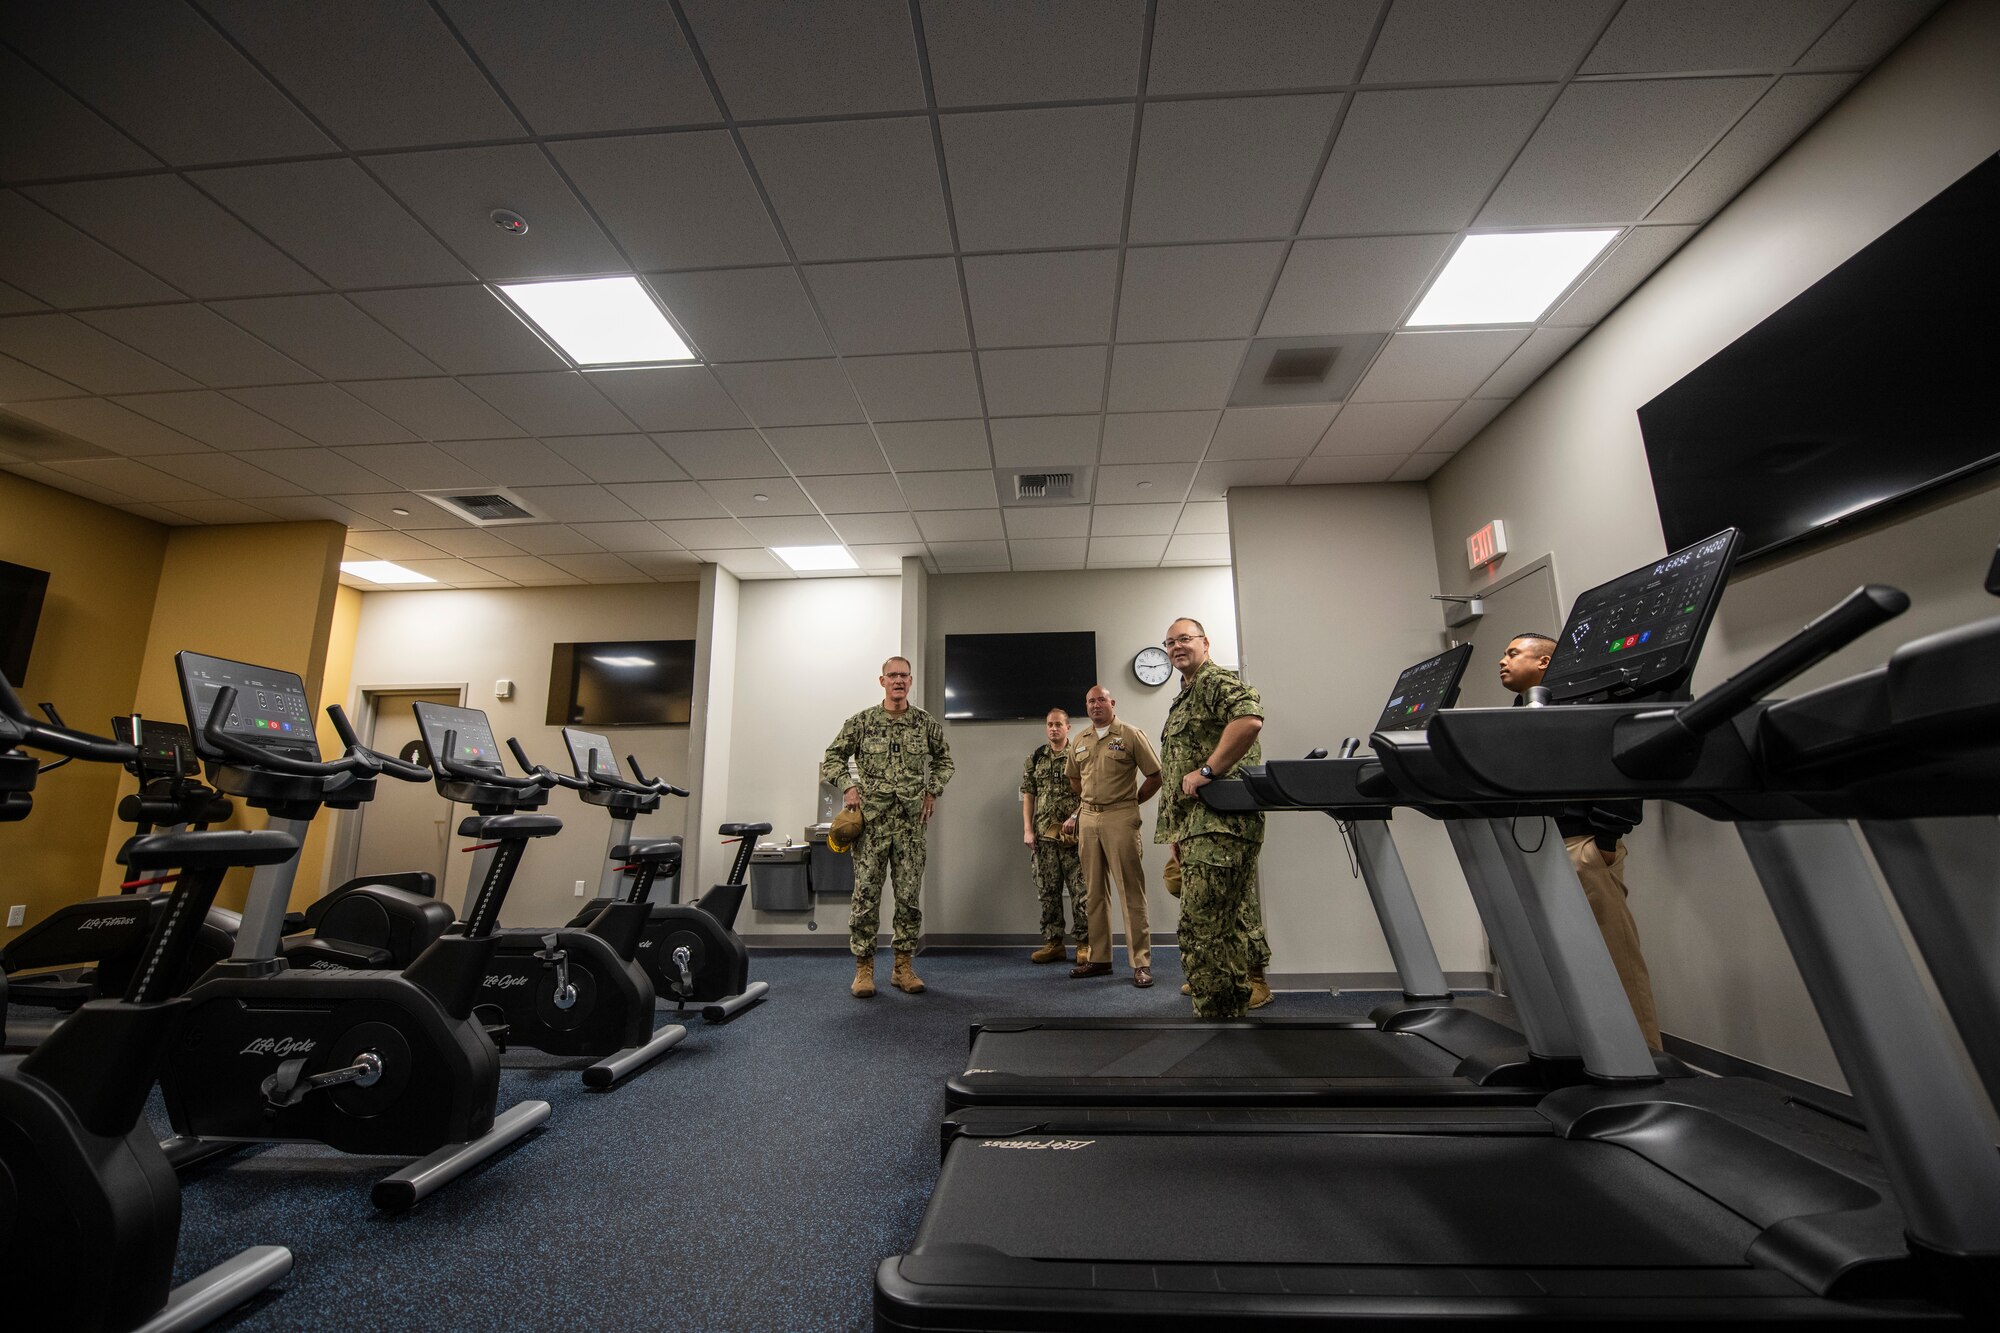 Navy personnel stand around a new gym room.